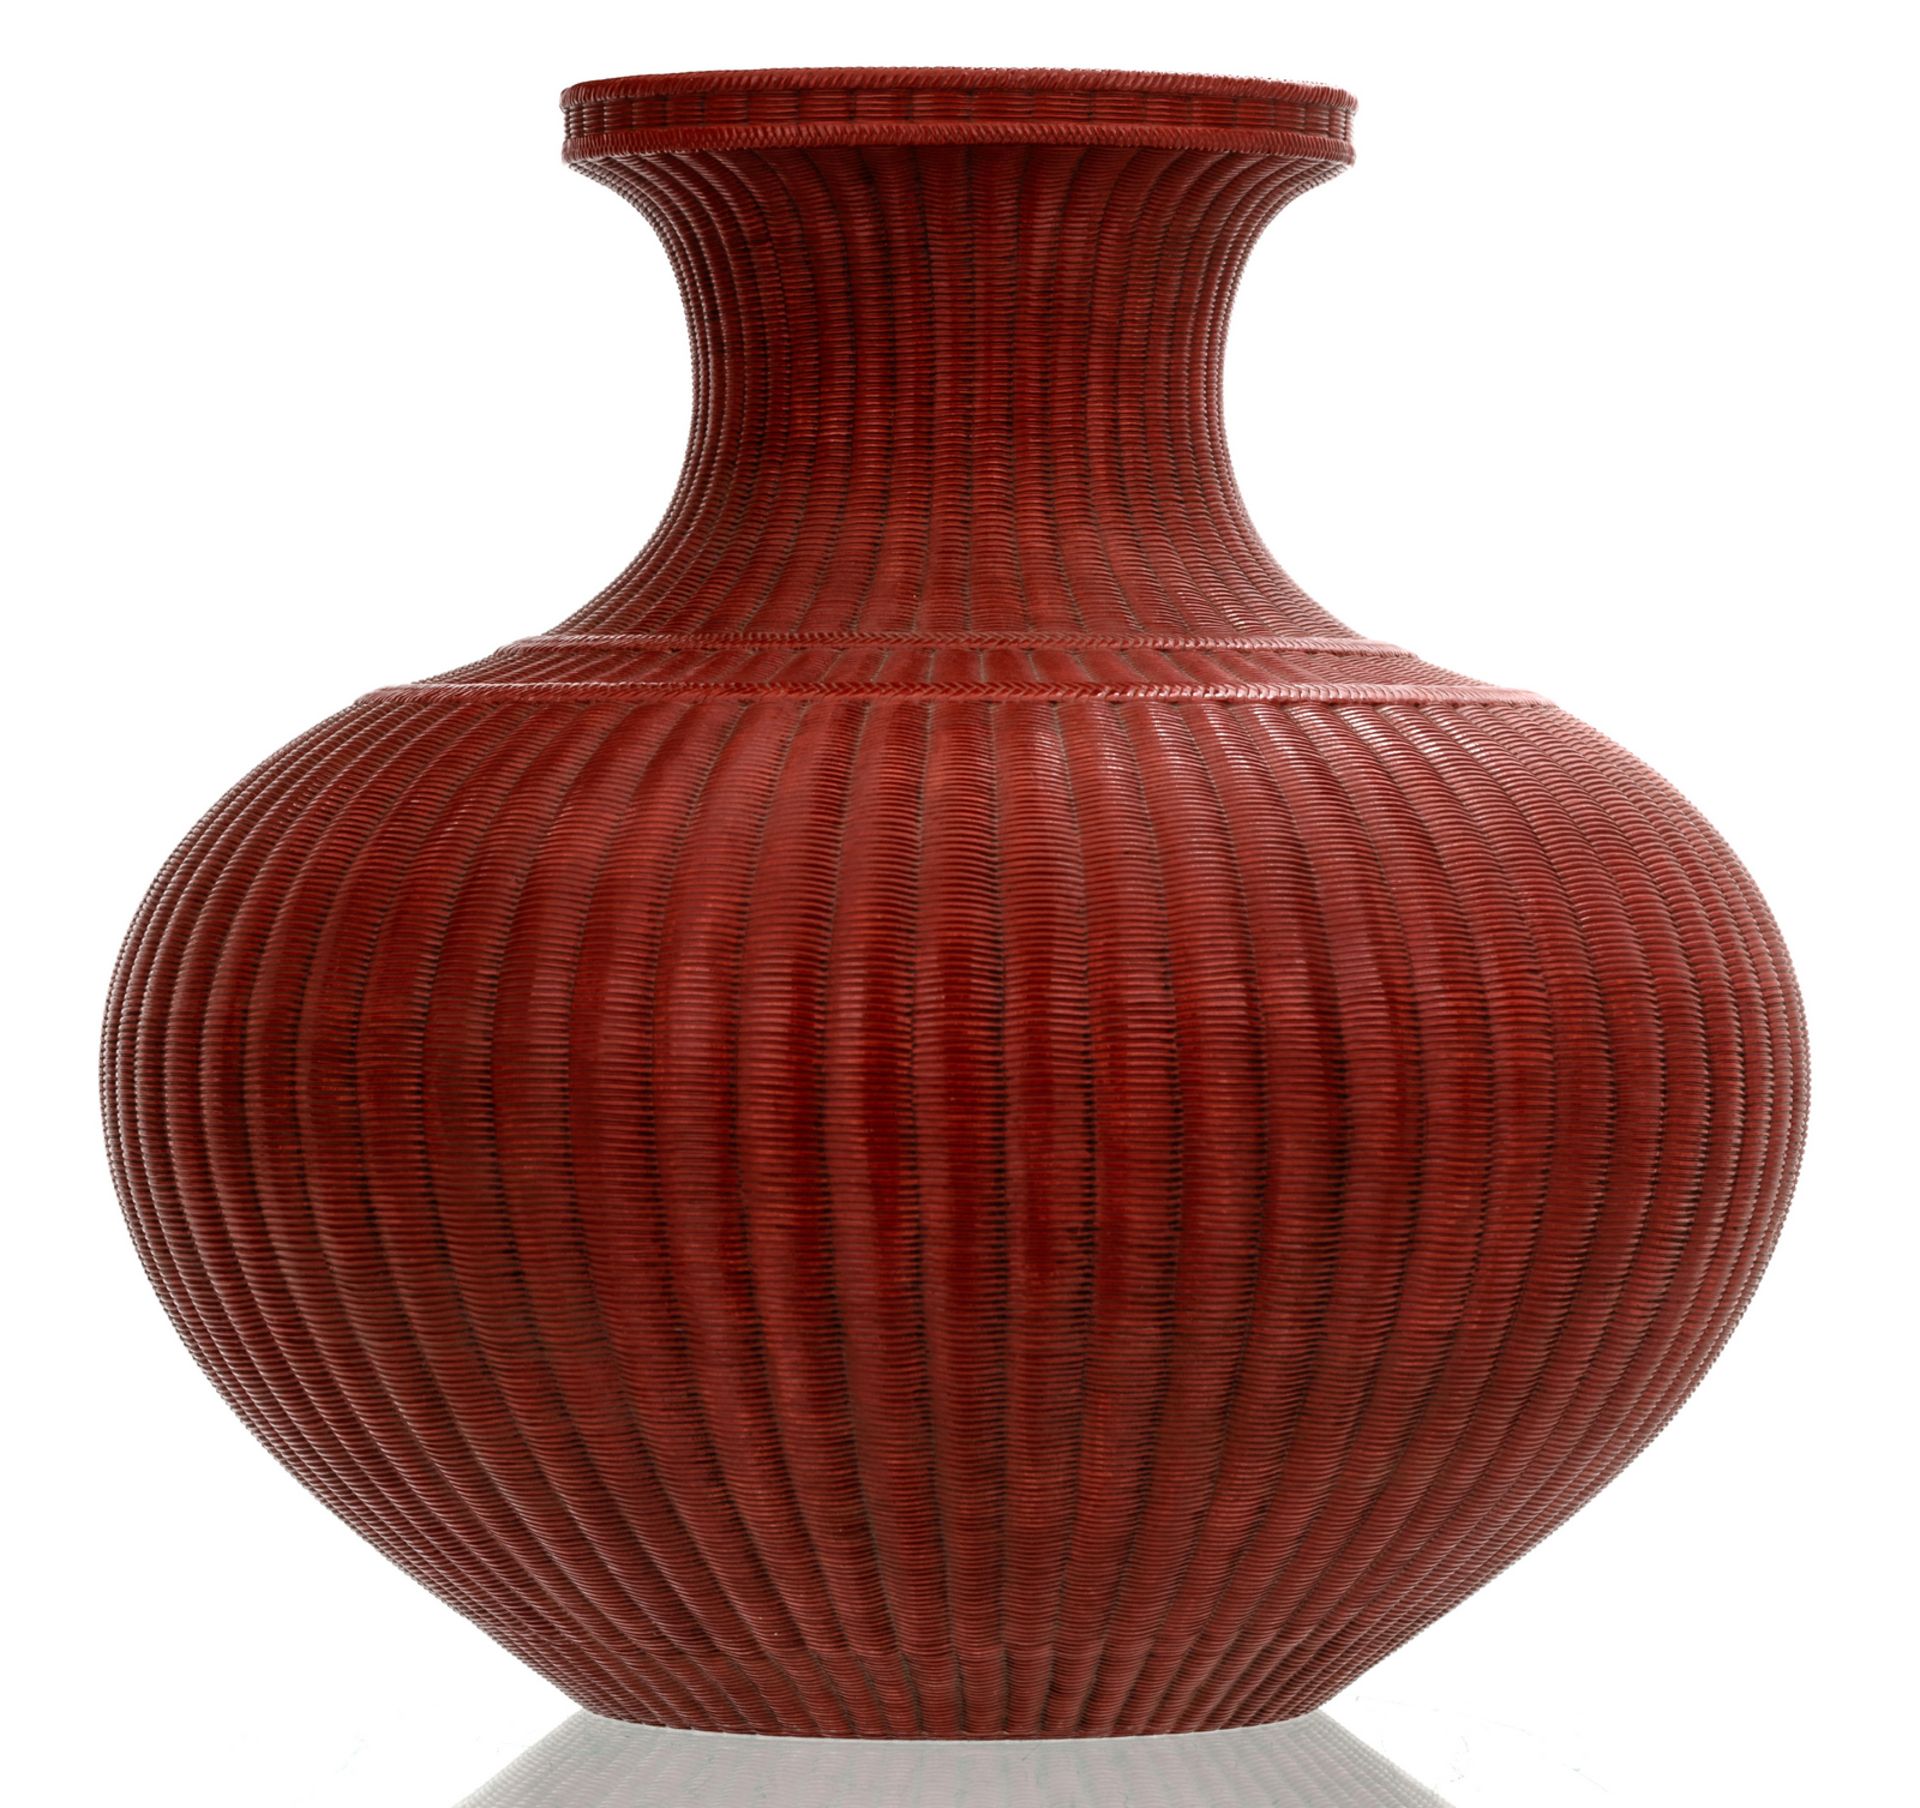 A fine Chinese red brown glazed reed basket shaped vase with a Yongzheng mark, H 40,5 cm - Image 2 of 7